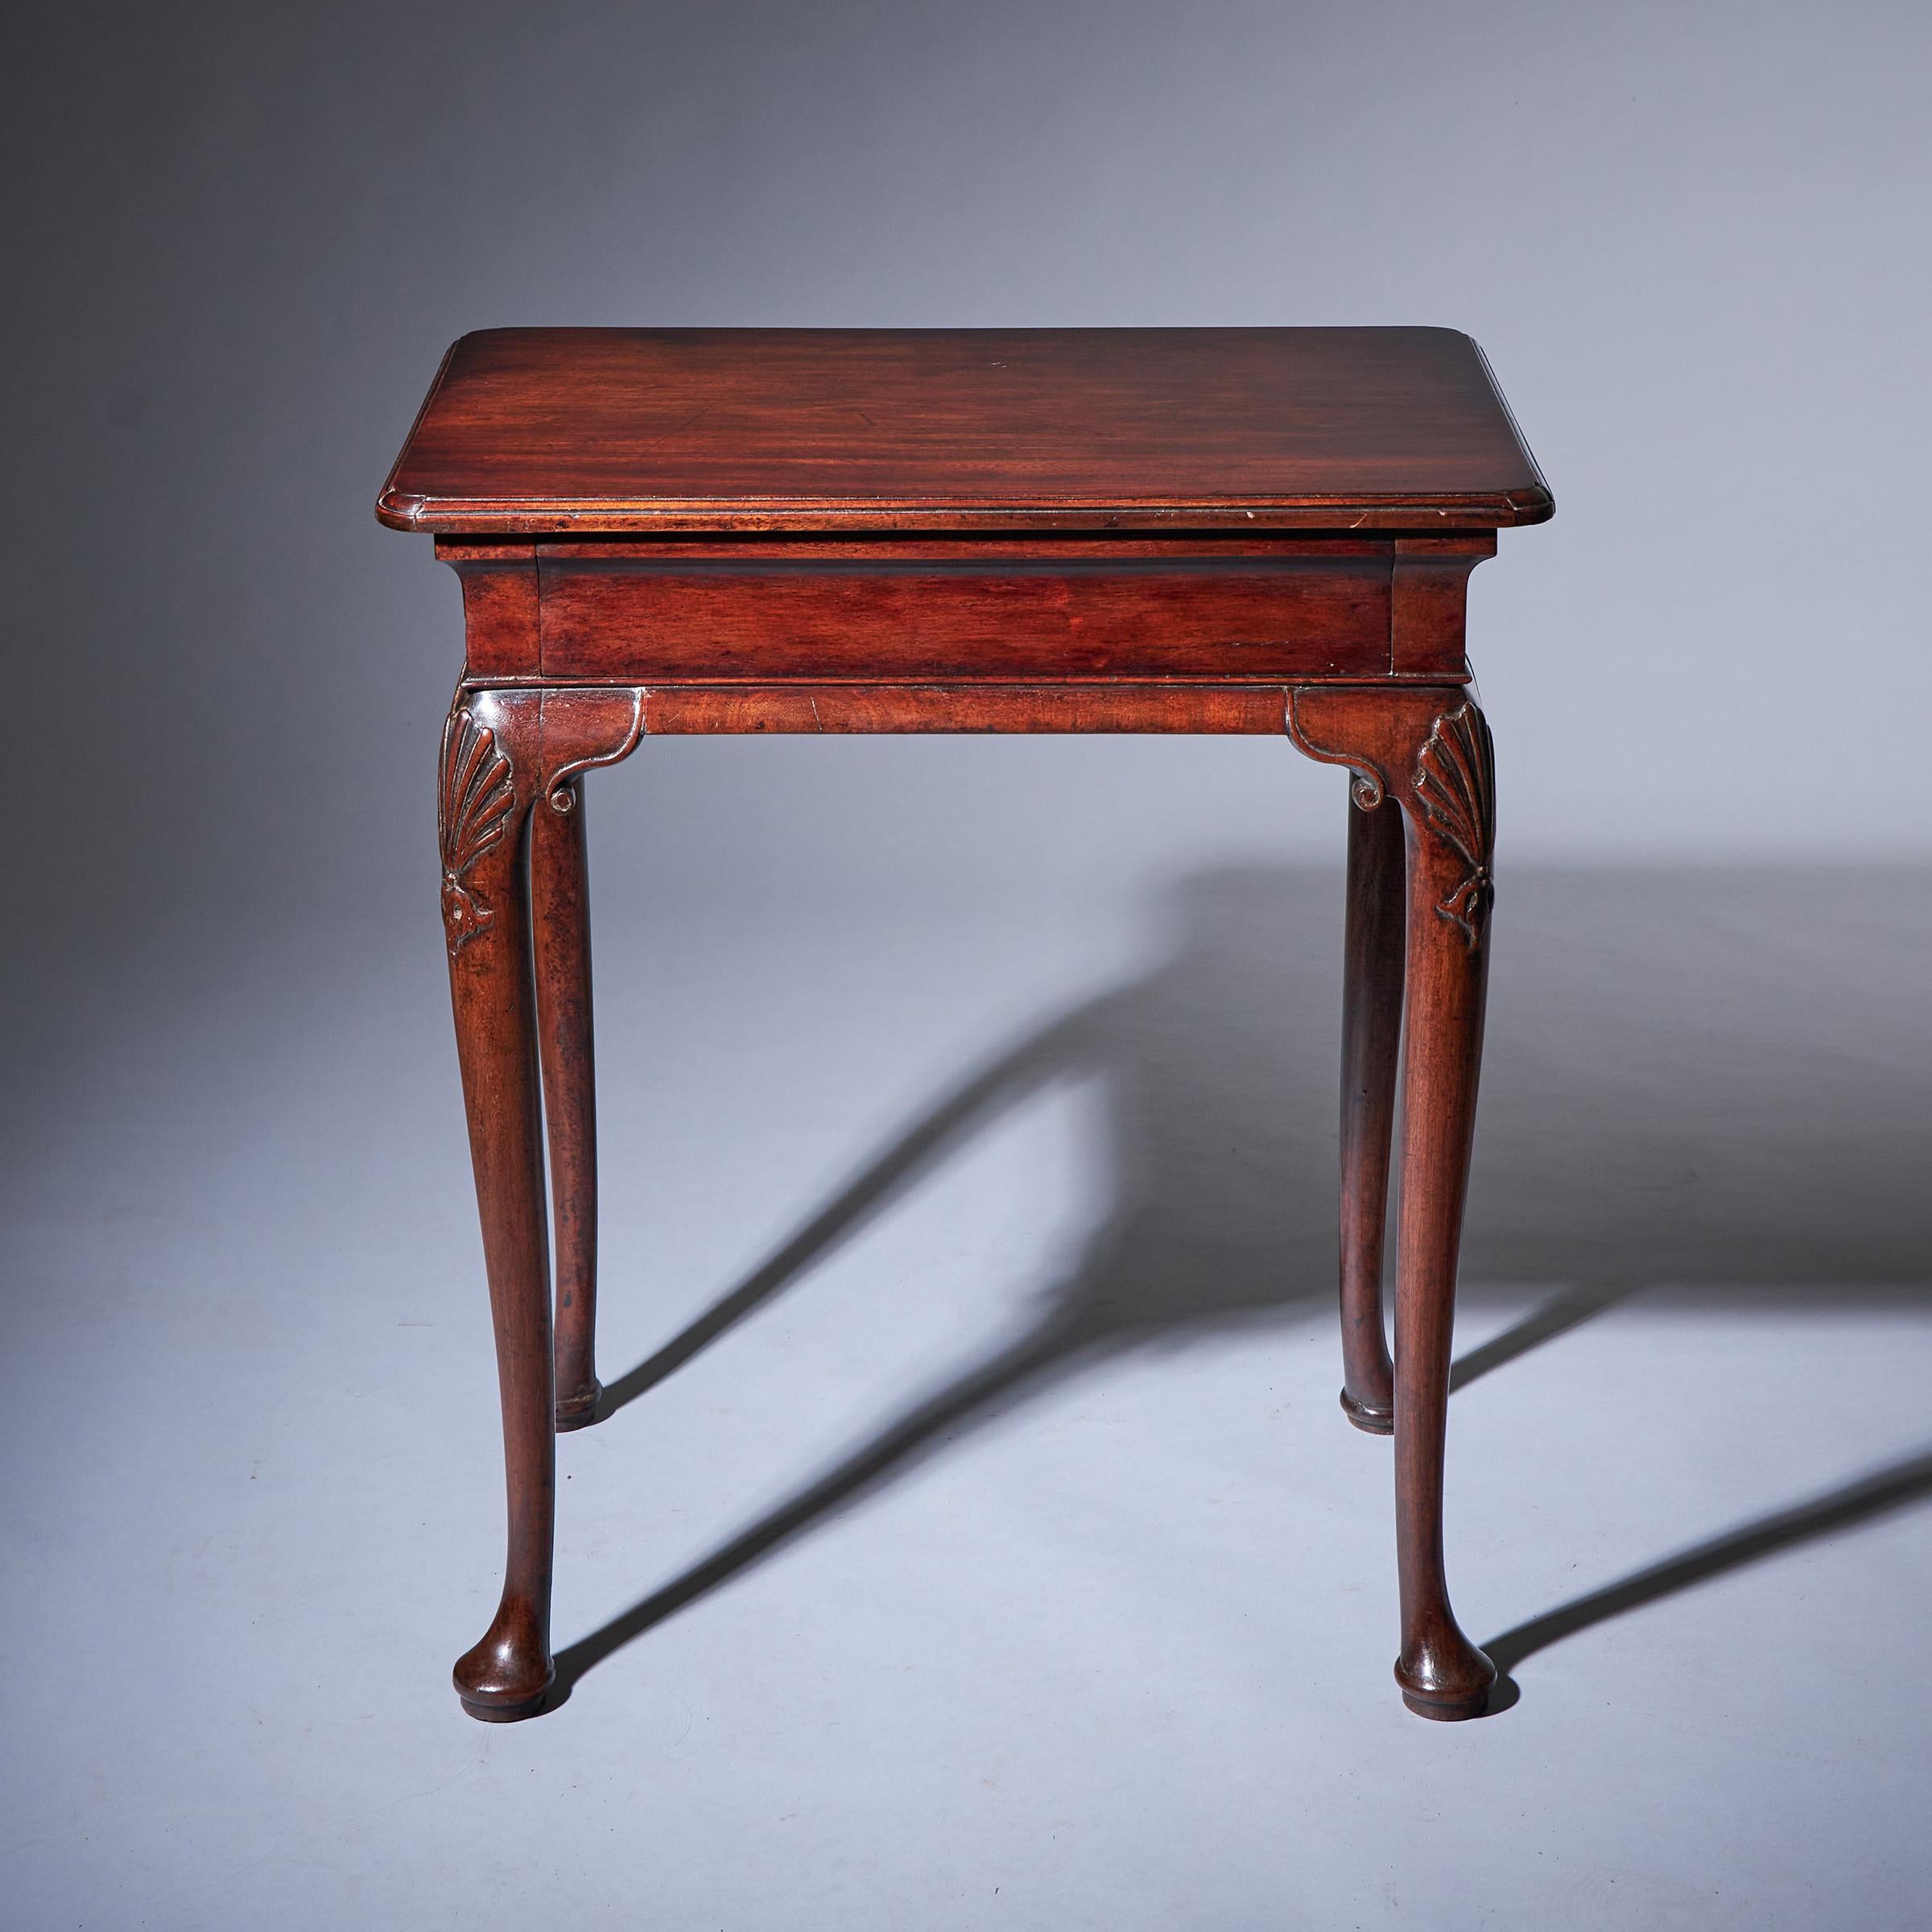 A fine and rare small George I mahogany table of diminutive proportions, circa 1725. England

The top, moulded to all sides and with reentrant corners sits above a cavetto frieze fitted with a finely lined drawer raised on scrolled ear cabriole